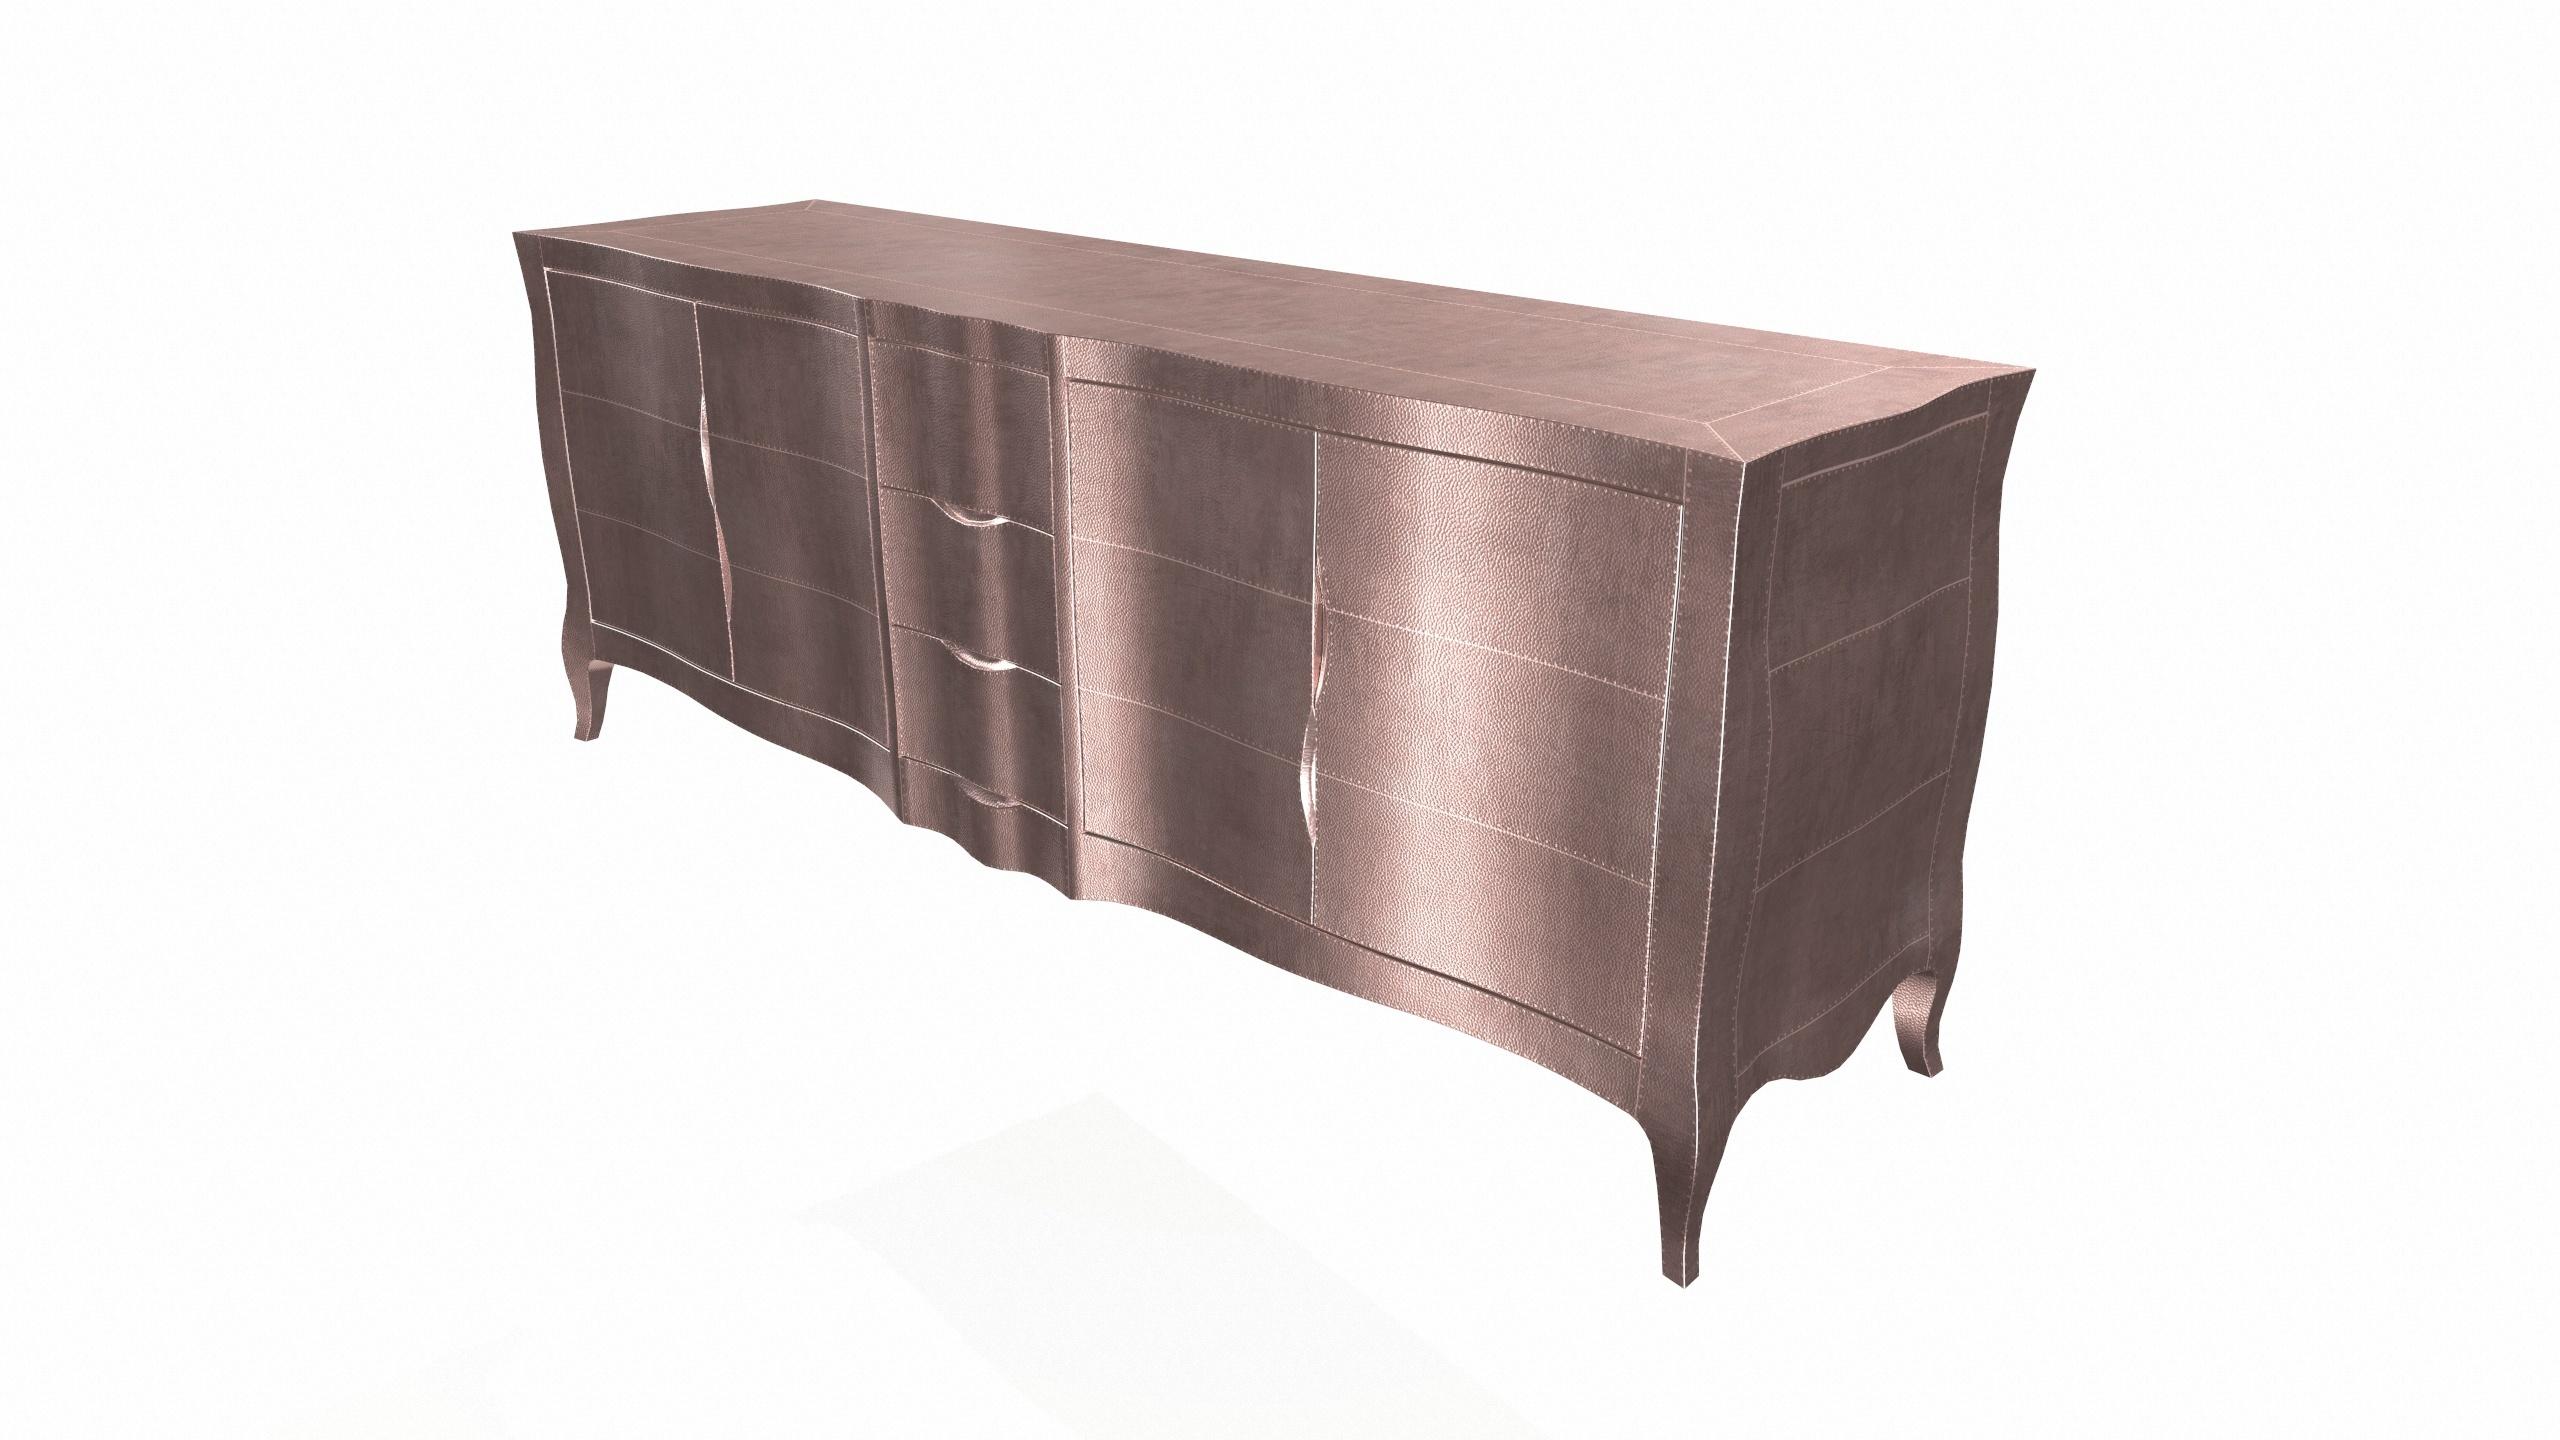 American Louise Credenza Art Deco Credenzas in Mid. Hammered Copper by Paul Mathieu For Sale